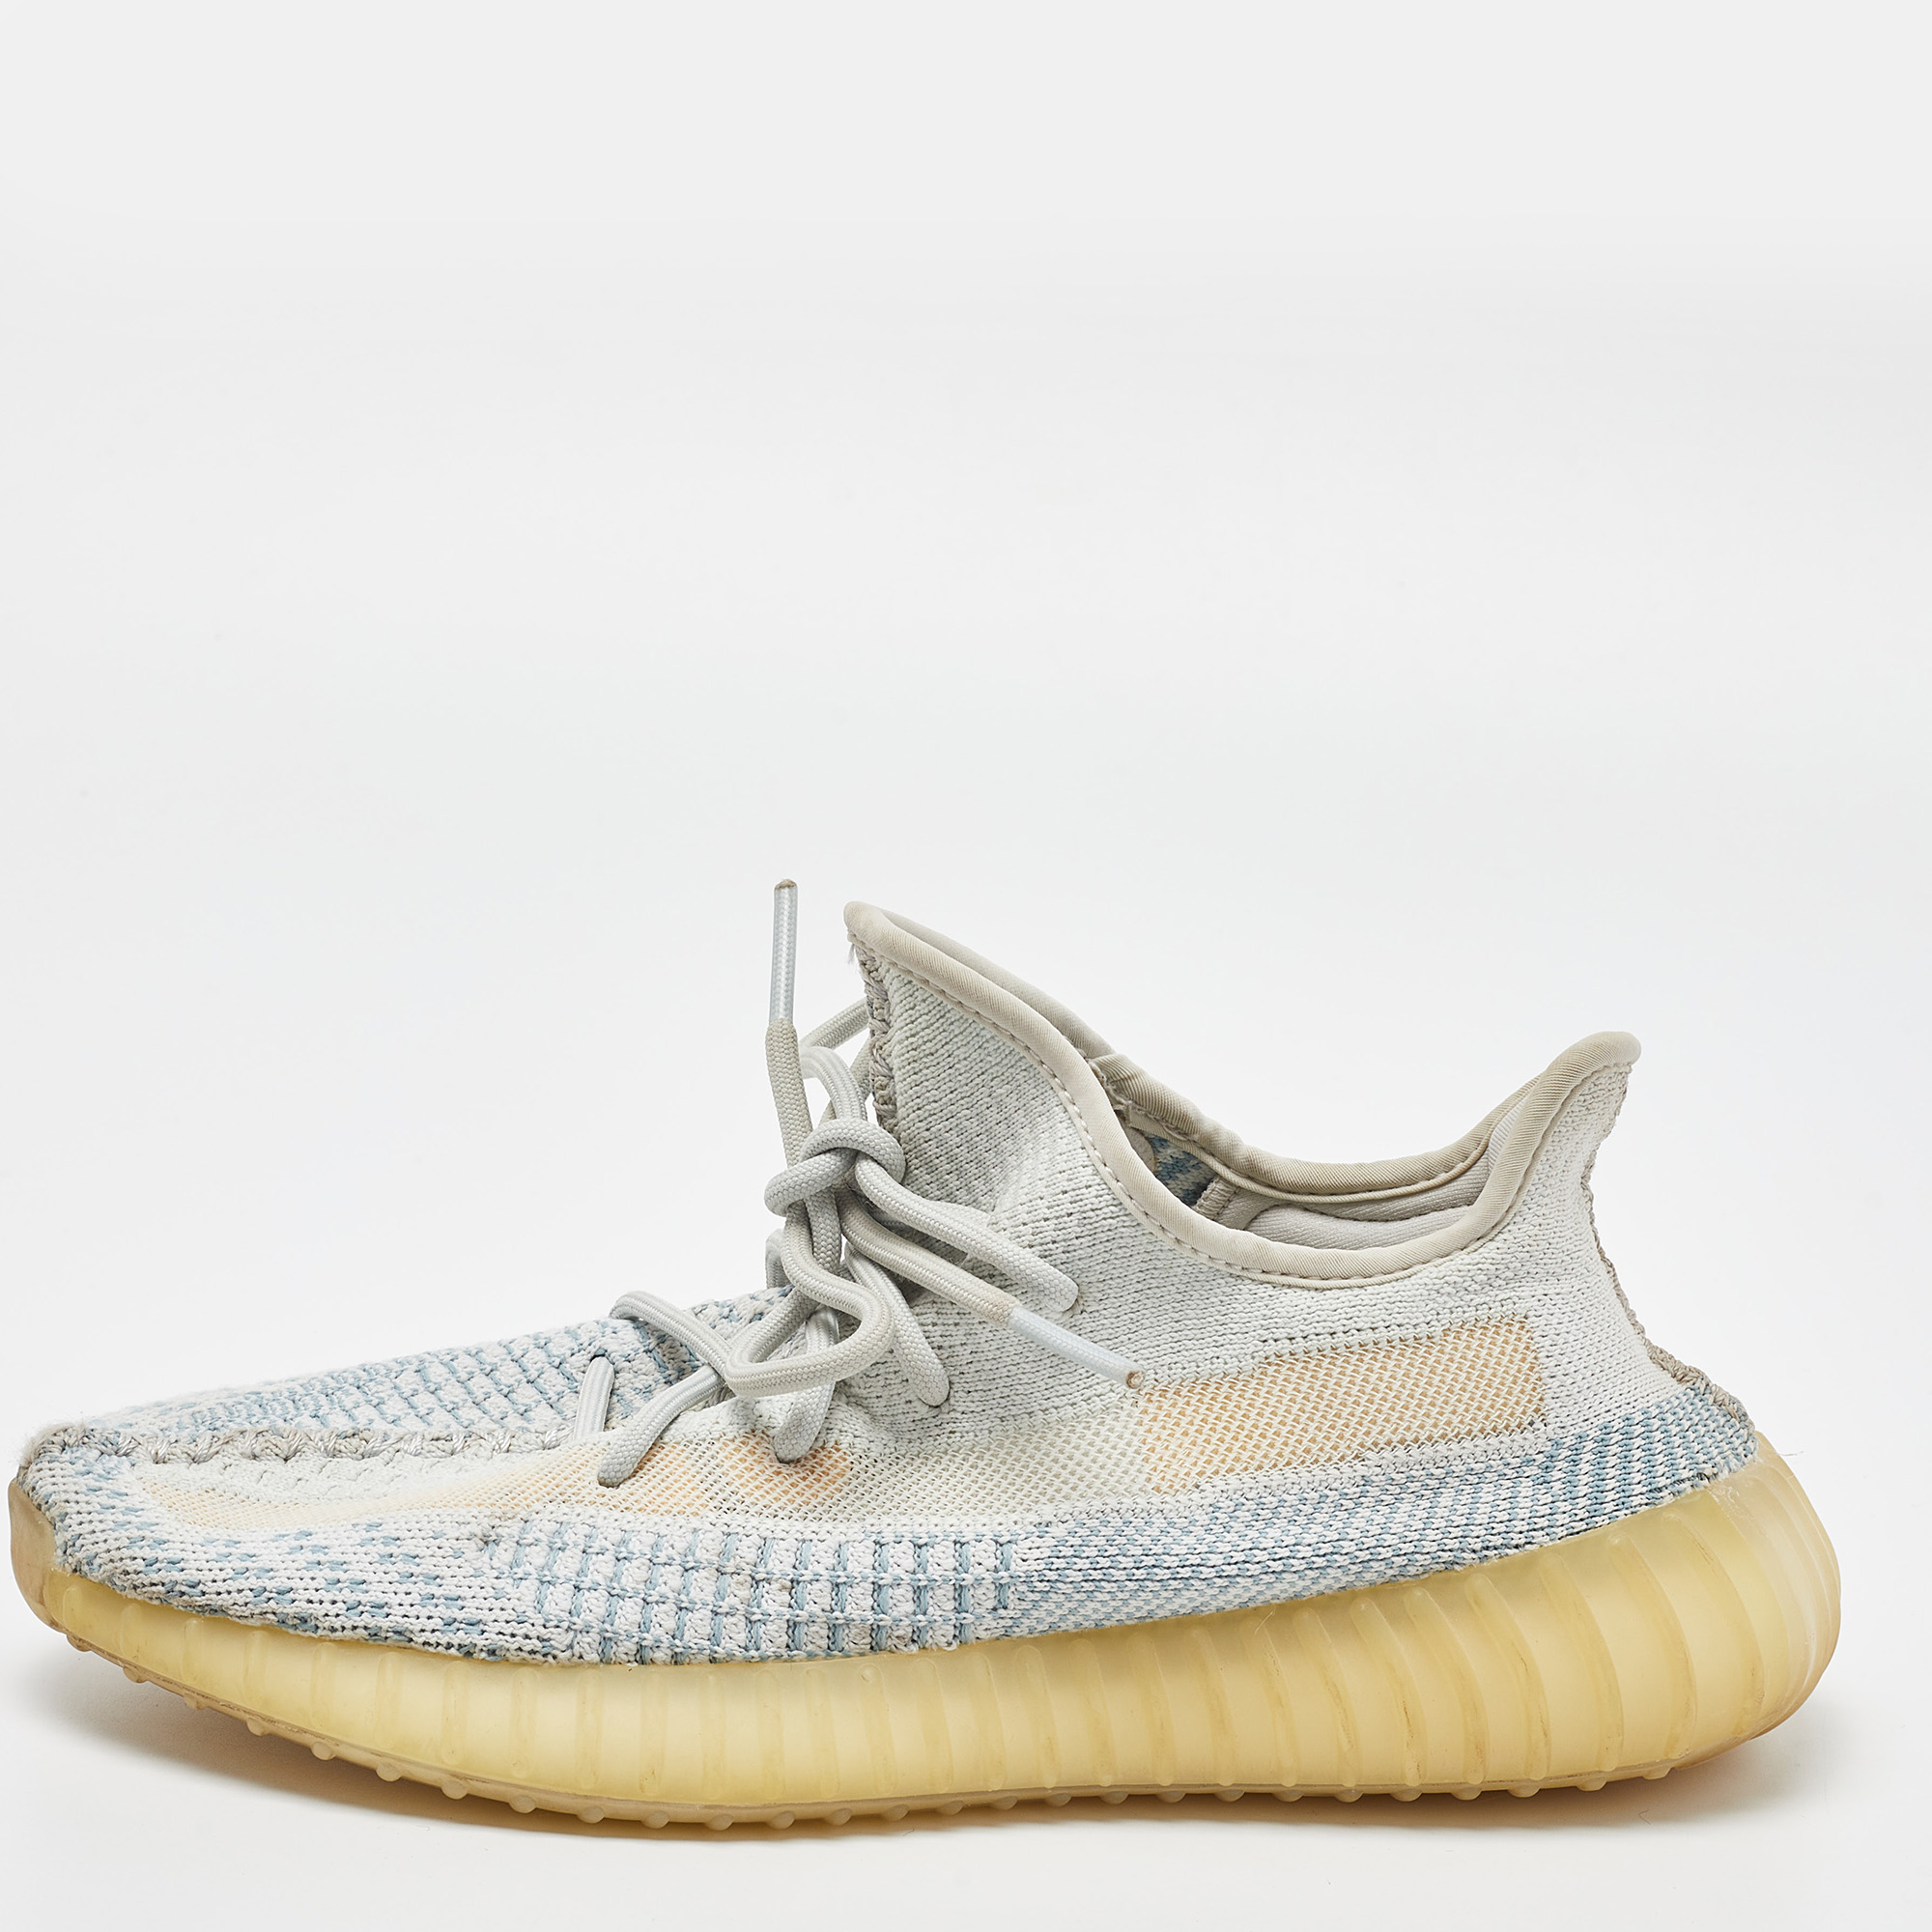 Pre-owned Yeezy X Adidas White/green Knit Fabric Boost 350 V2 Cloud White Non Reflective Sneakers Size 40 2/3